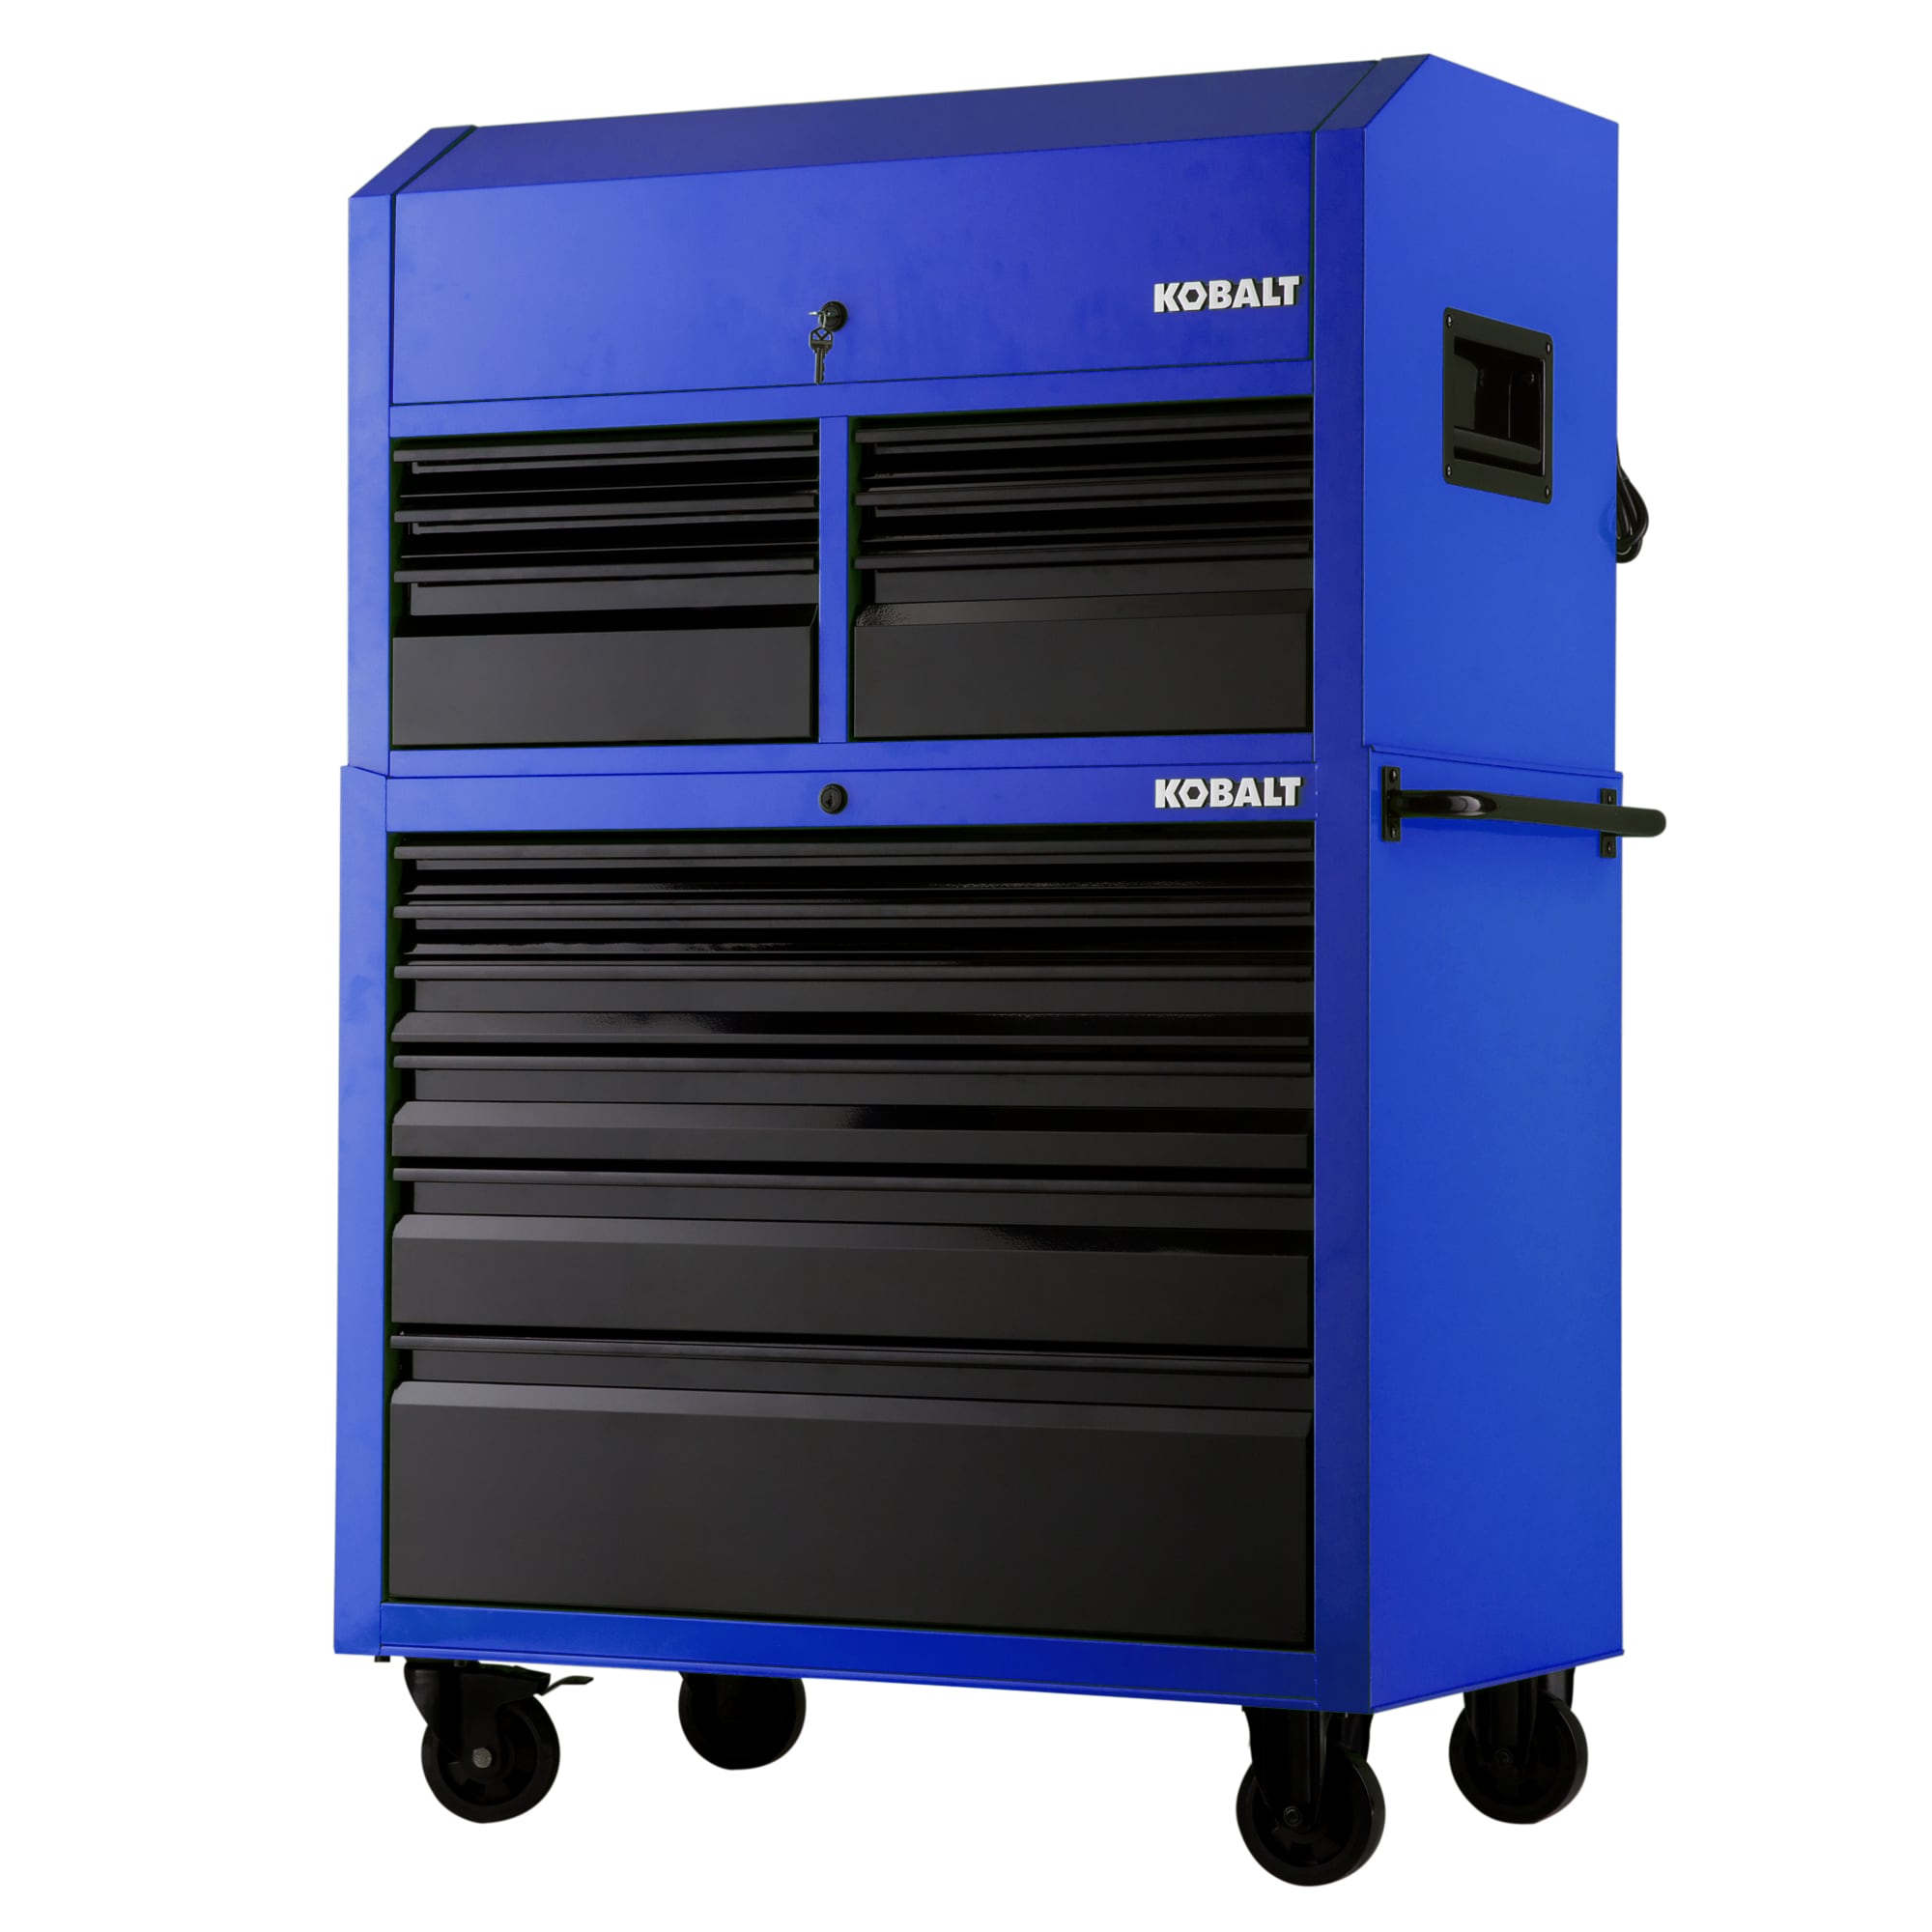 Kobalt 41-in W x 63.4-in H 12 Ball-bearing Steel Tool Chest Combo (Multiple  Colors/Finishes) at